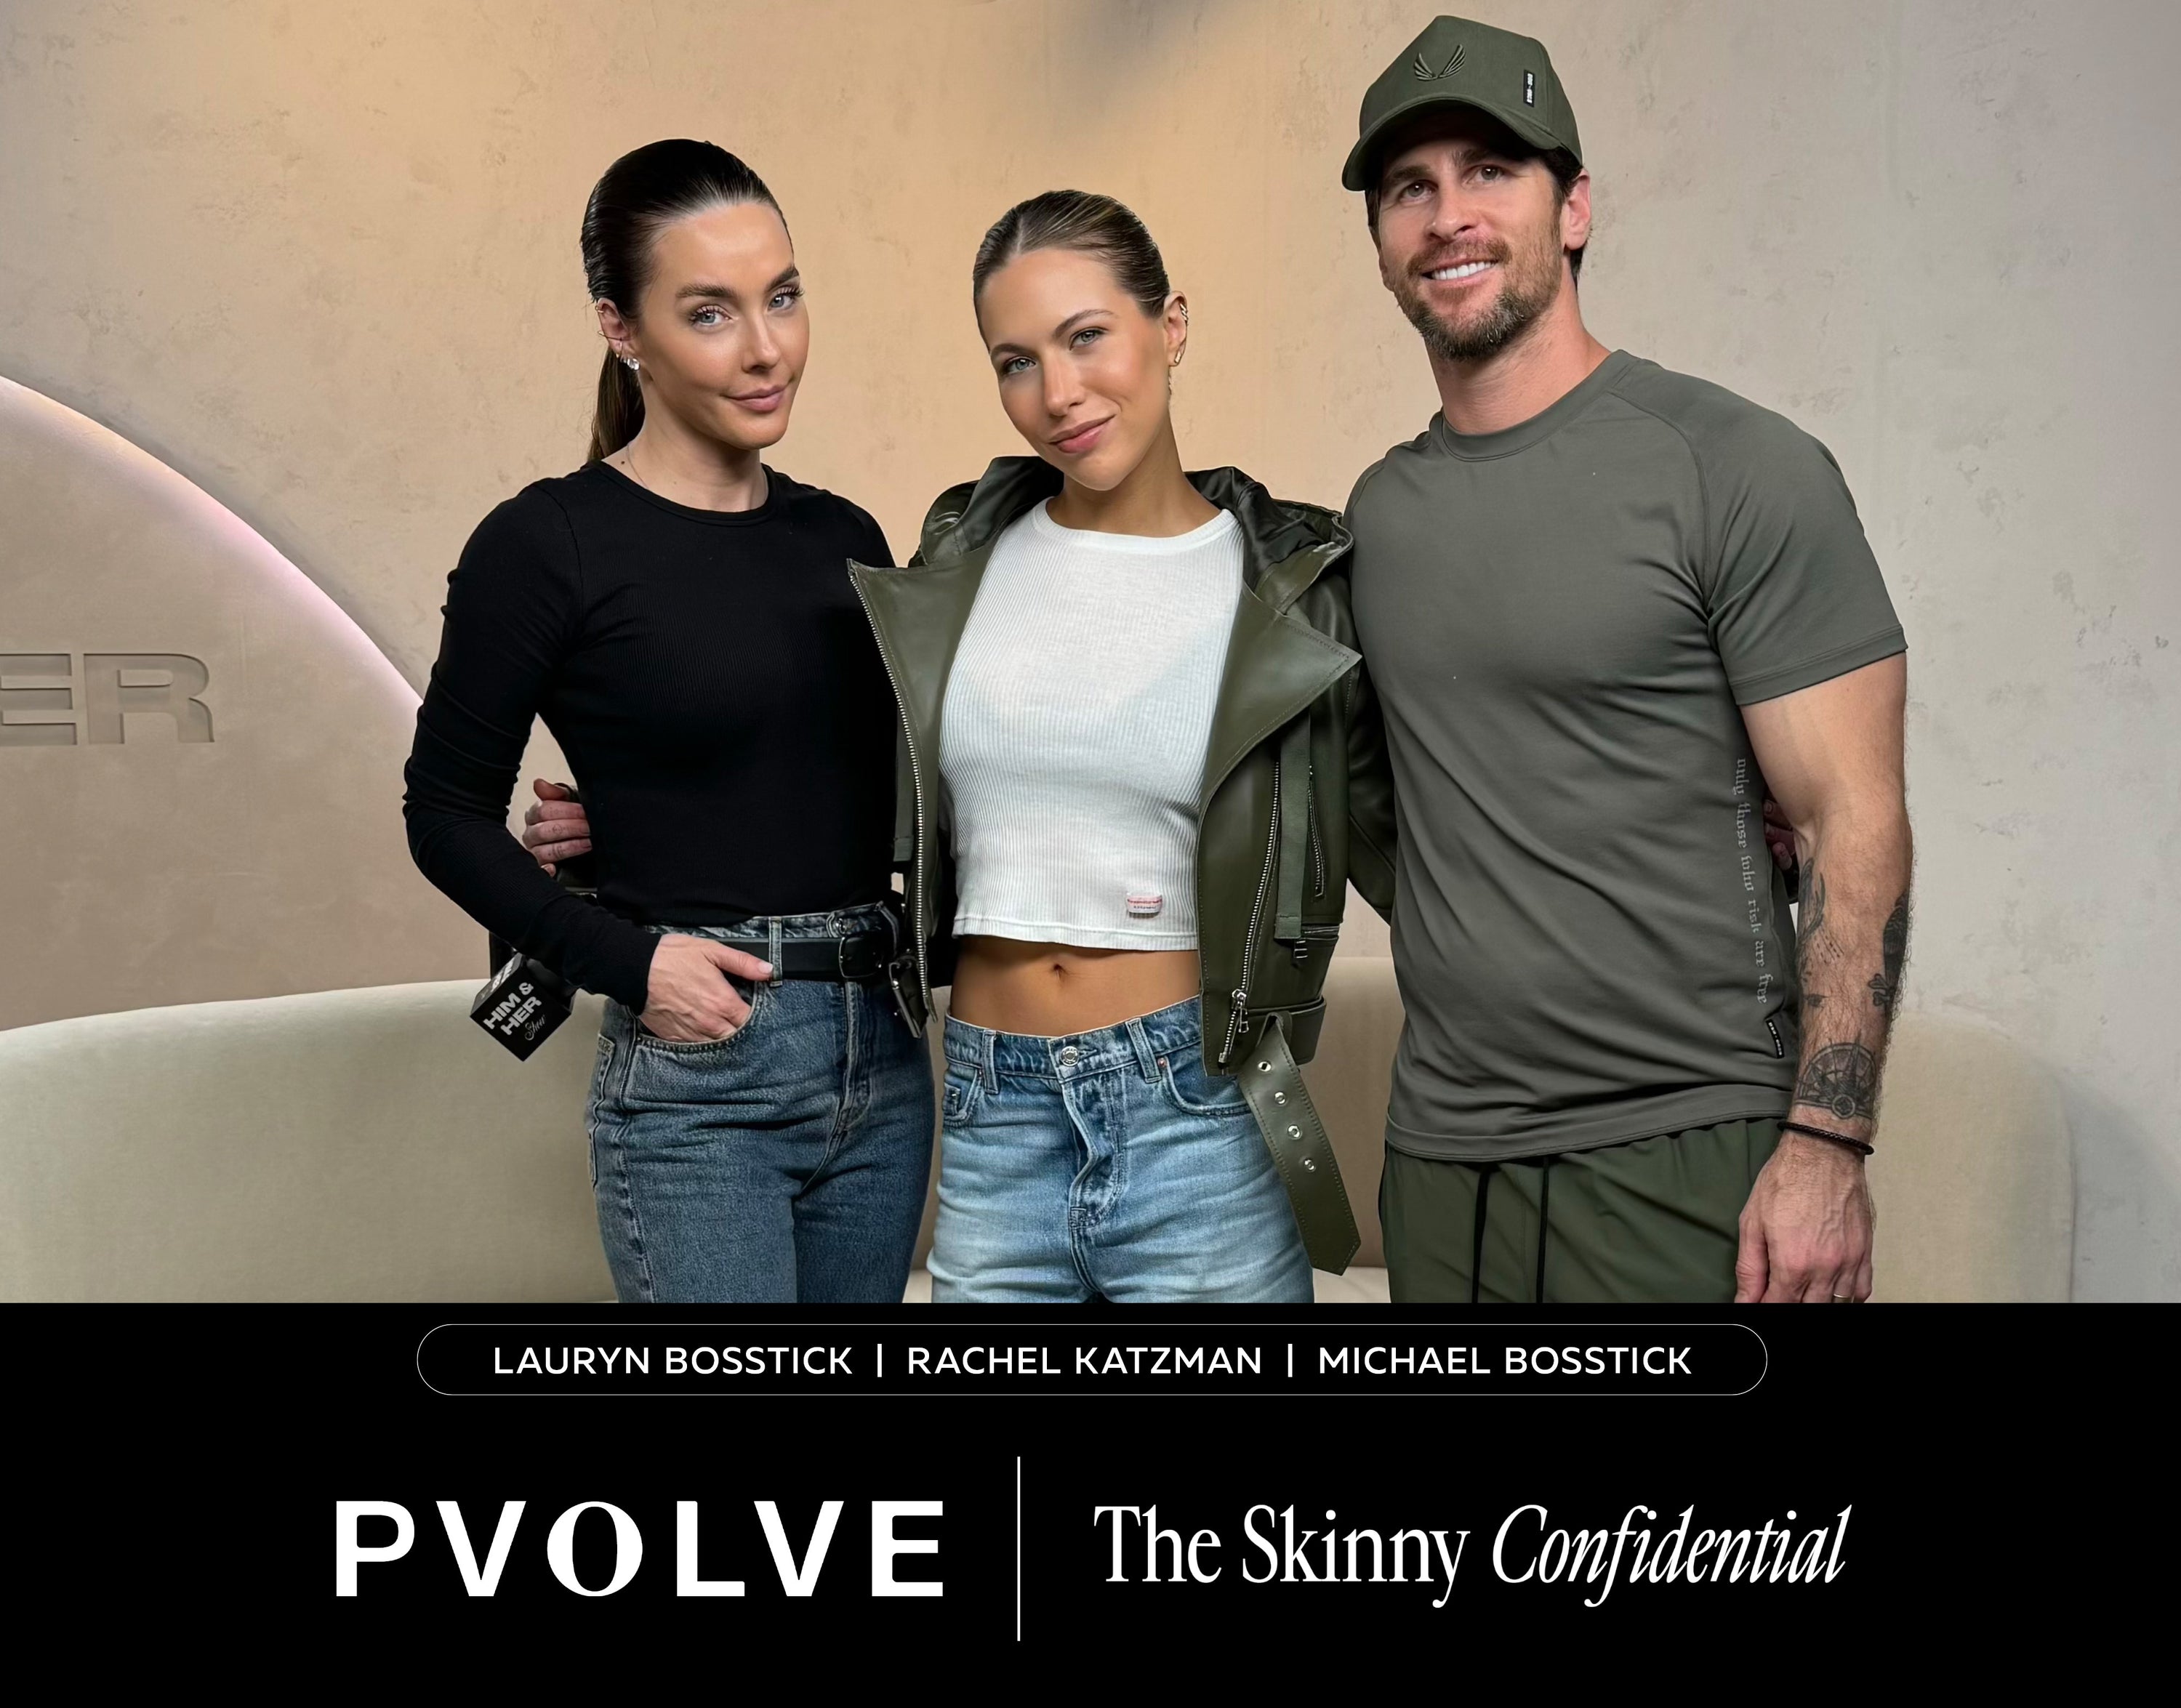 Pvolve founder with hosts of The Skinny Confidential podcast